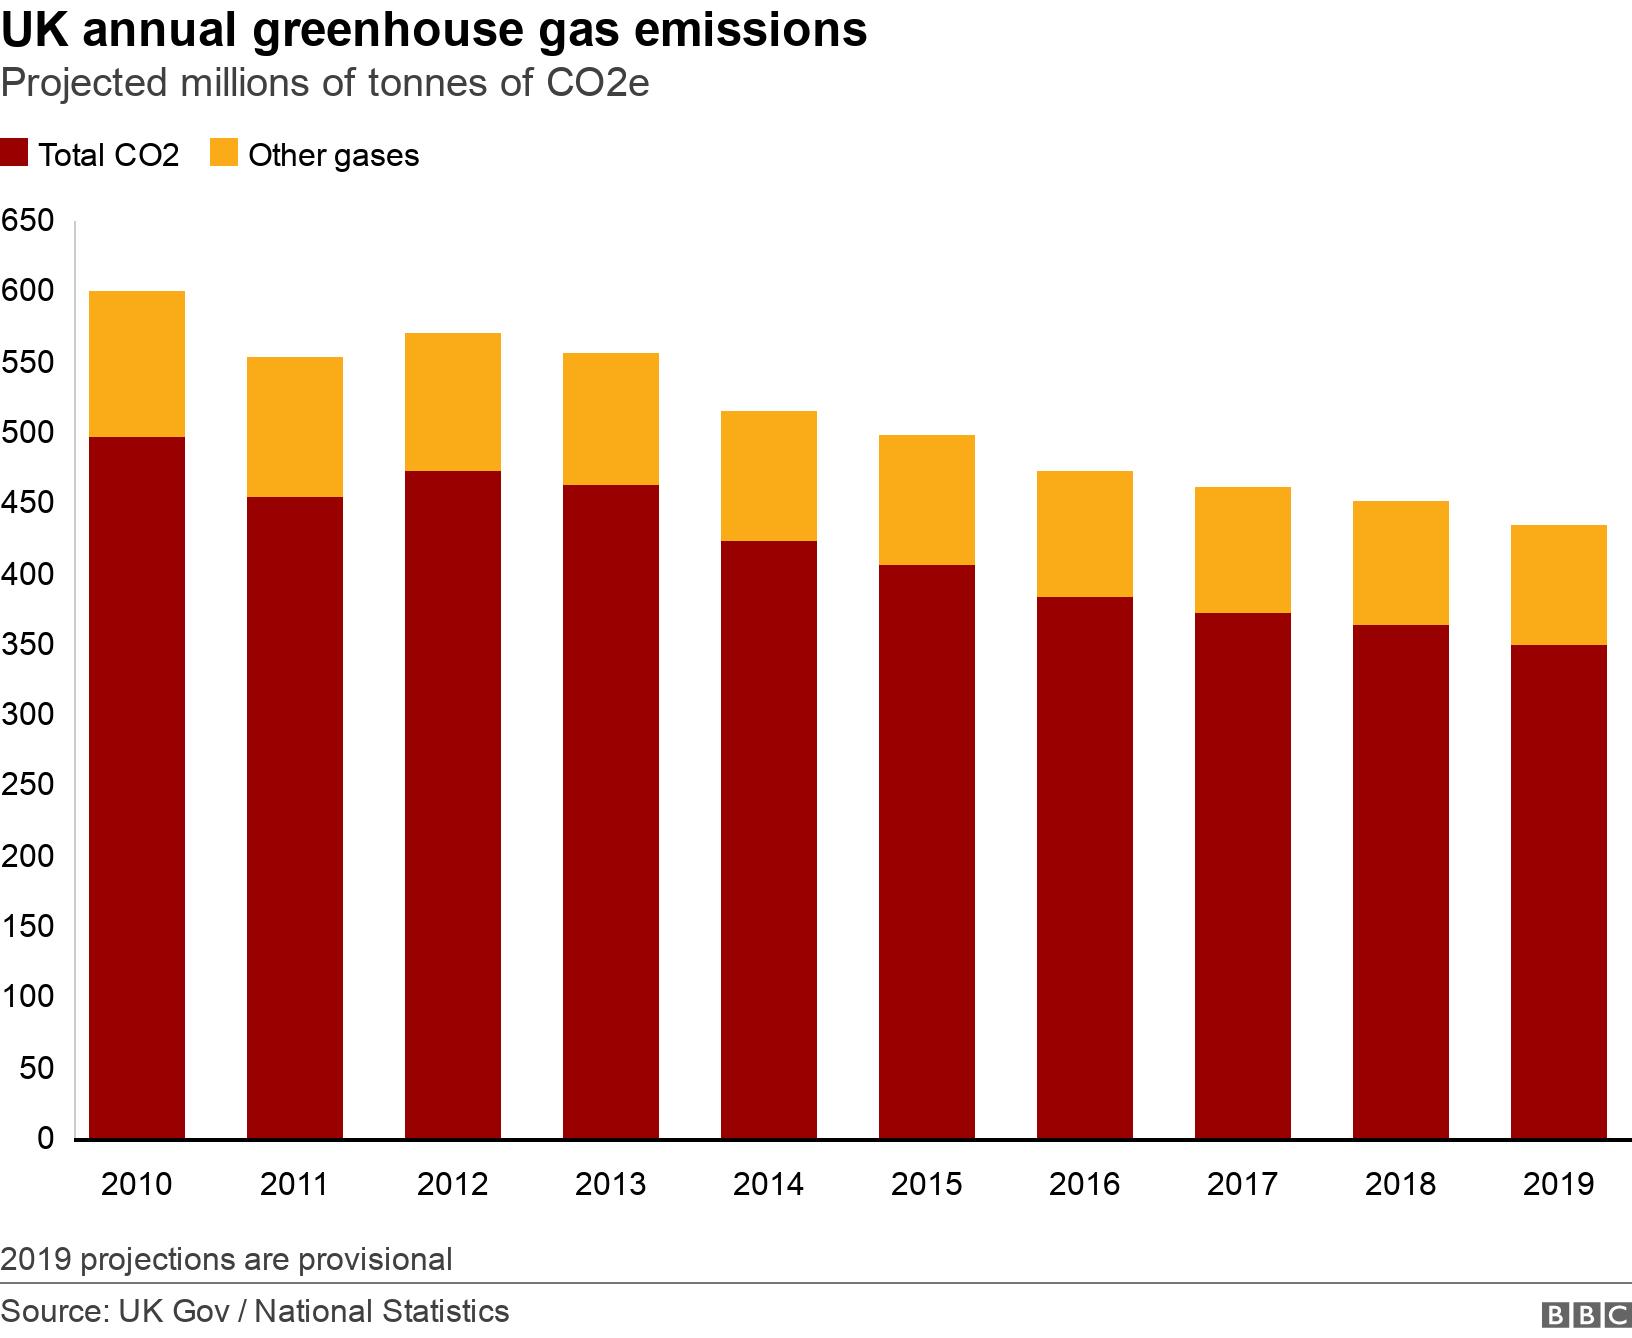 UK annual greenhouse gas emissions. Projected millions of tonnes of CO2e.  2019 projections are provisional.